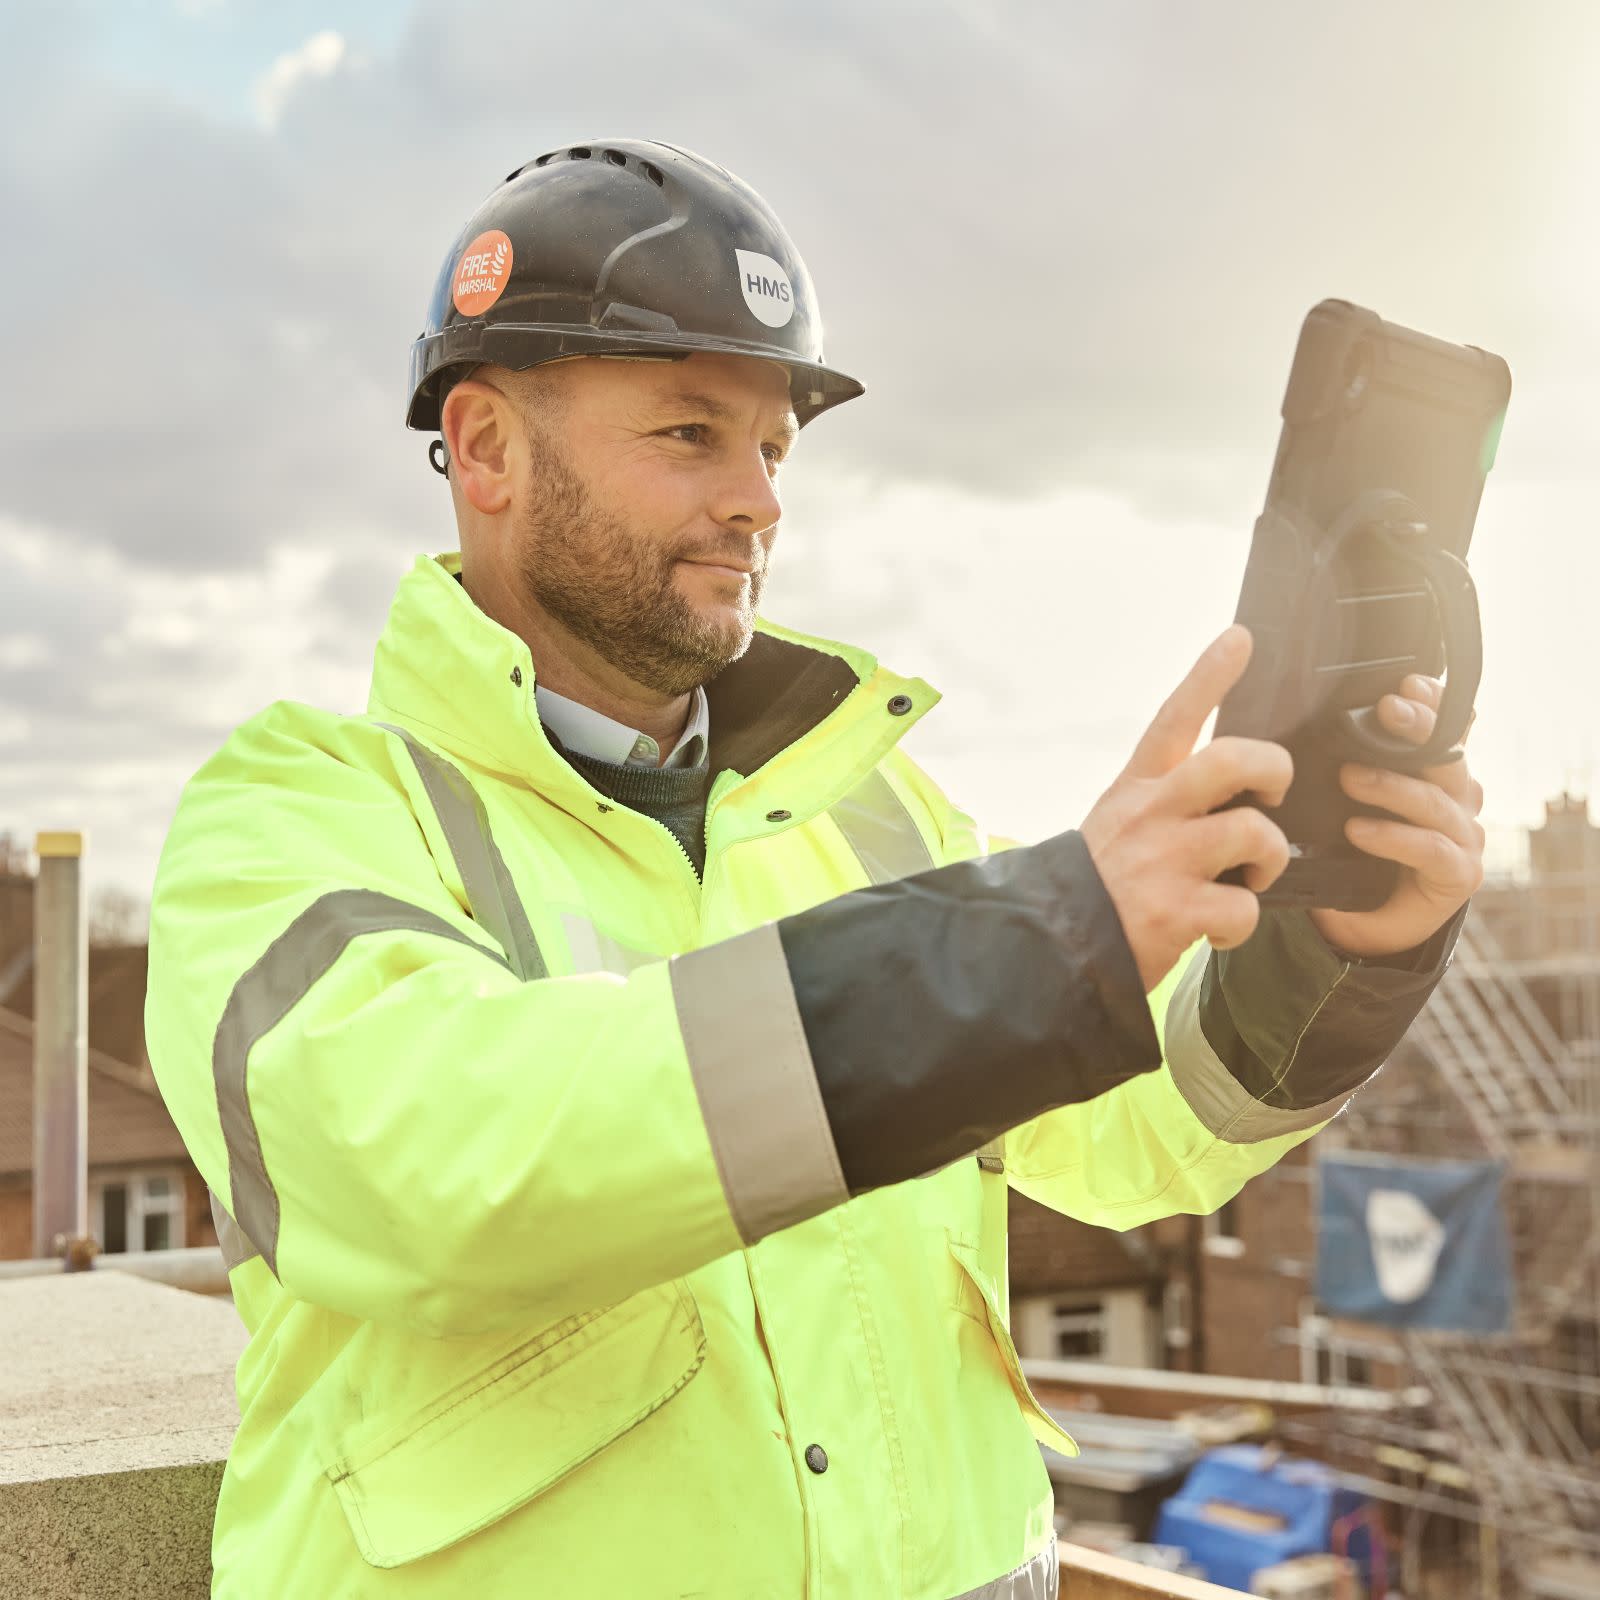 A man wearing safety gear holding a tablet on a jobsite